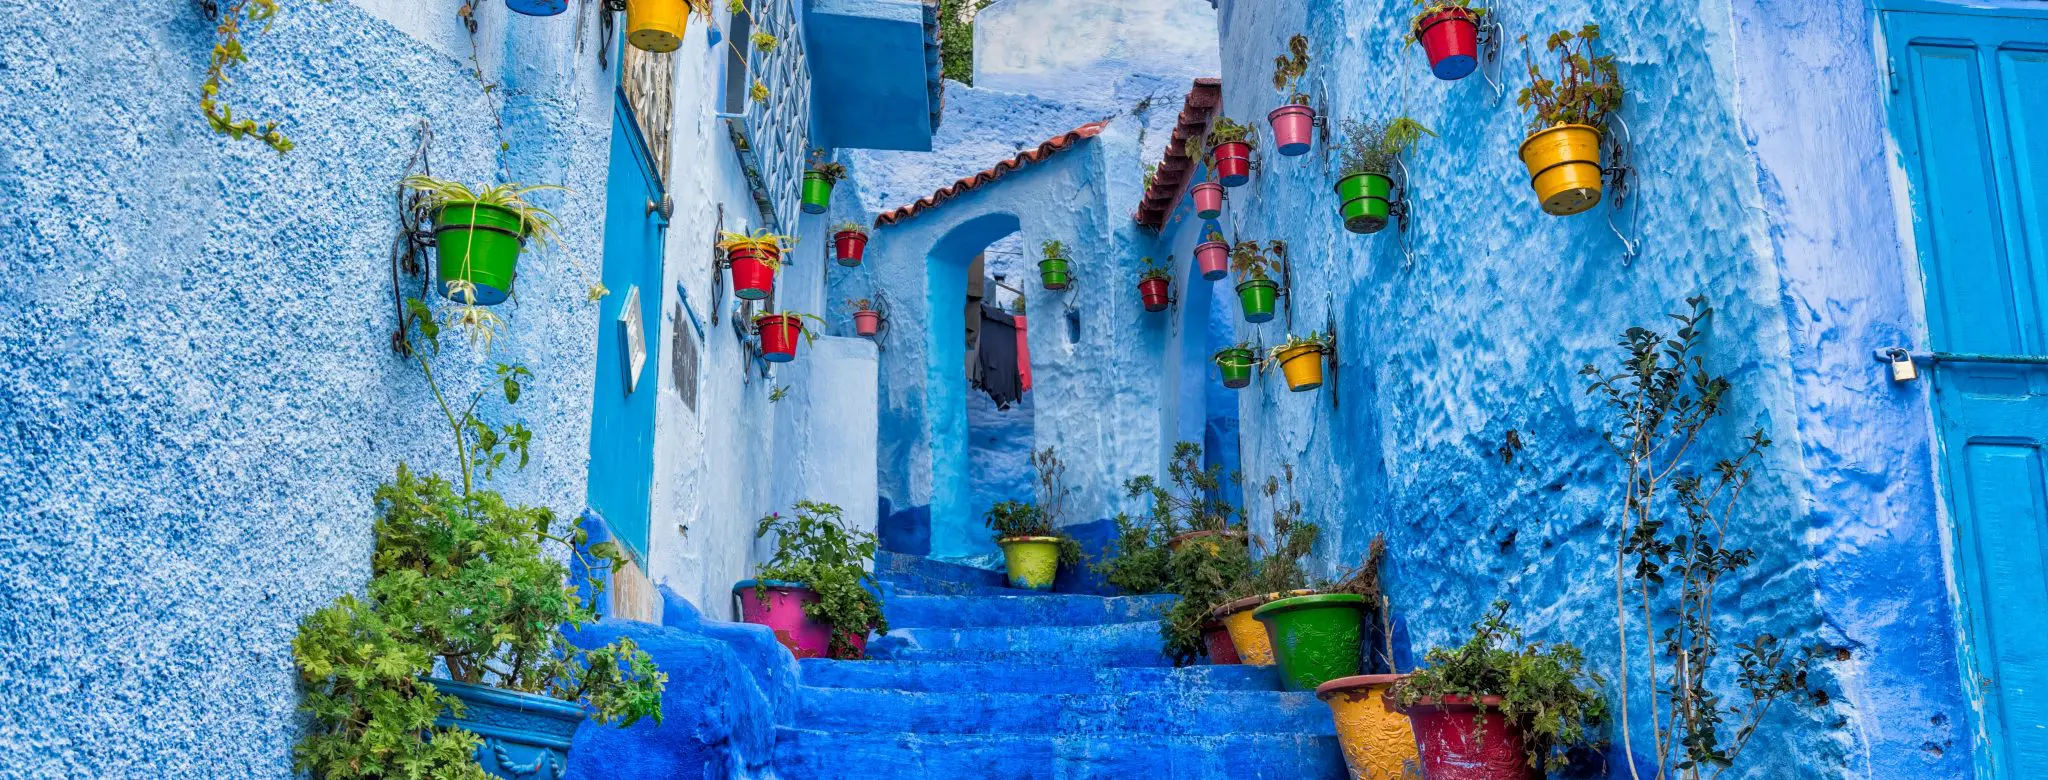 Exotic Morocco: The Know Before You Go